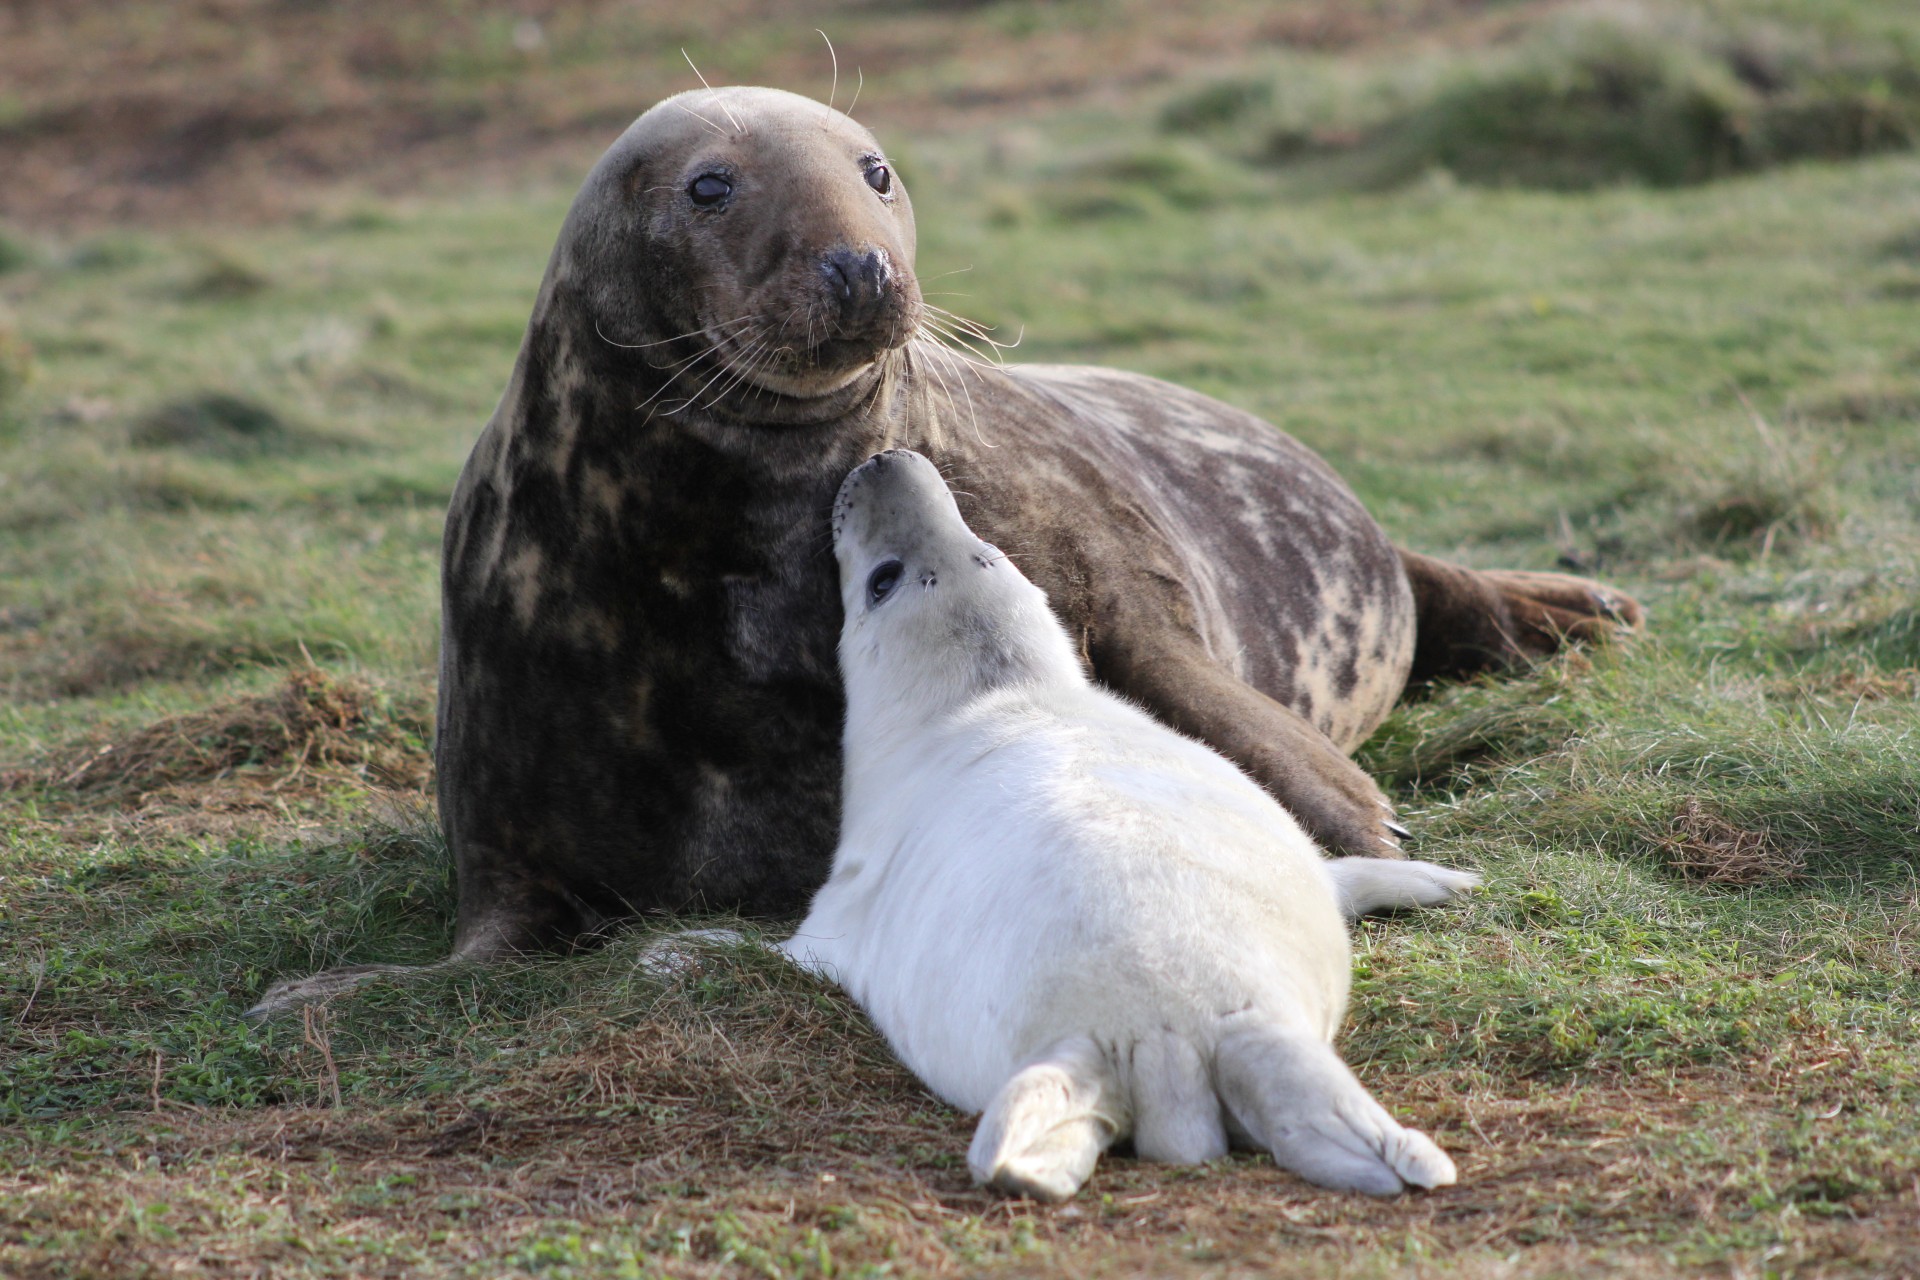 SPOTLIGHT ON:  Risk to baby seals from chemicals in mothers' milk